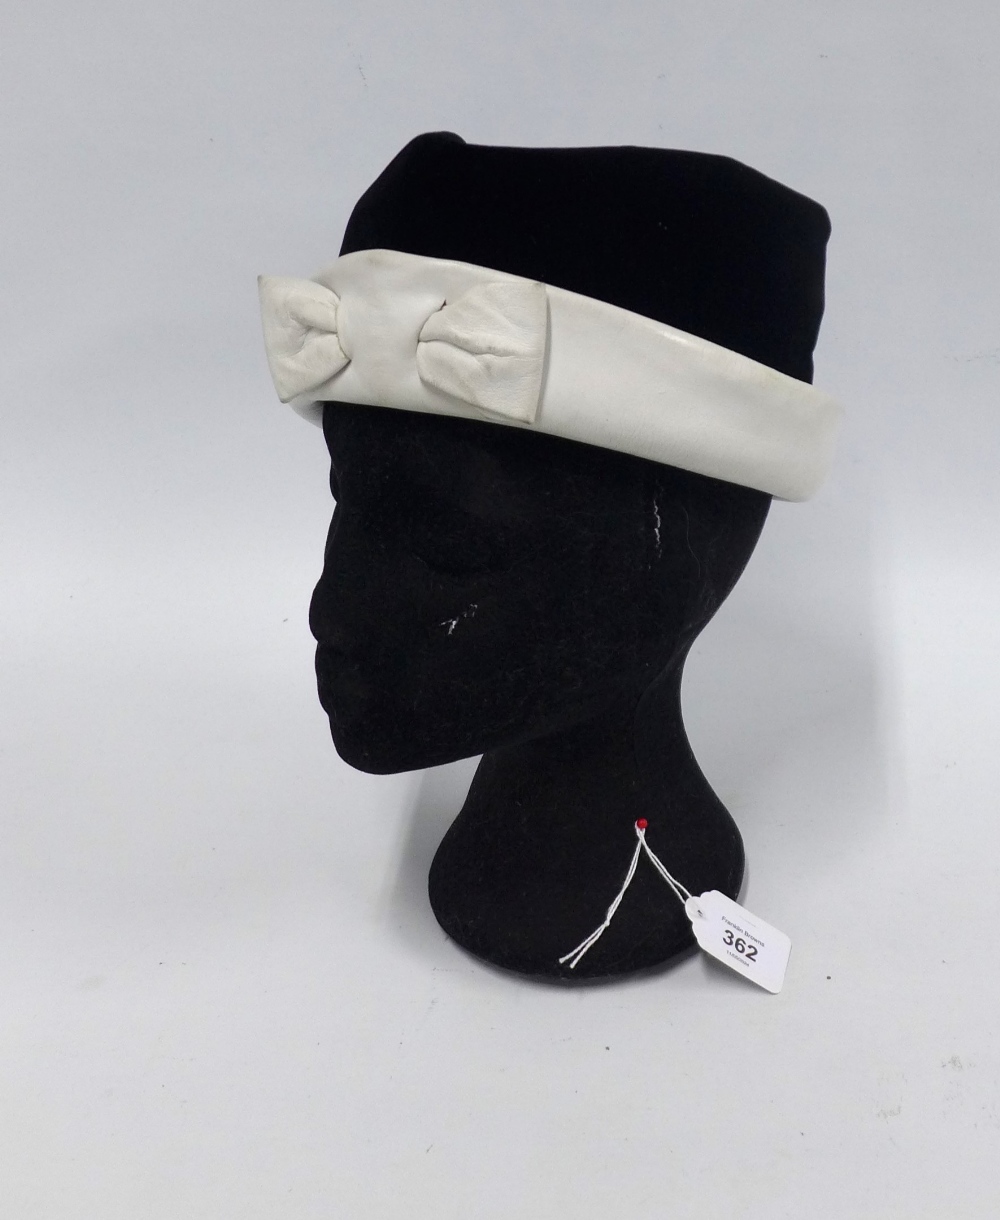 CHRISTIAN DIOR, vintage hat in black velvet with white leather band and bow, labelled Christian Dior - Image 2 of 2